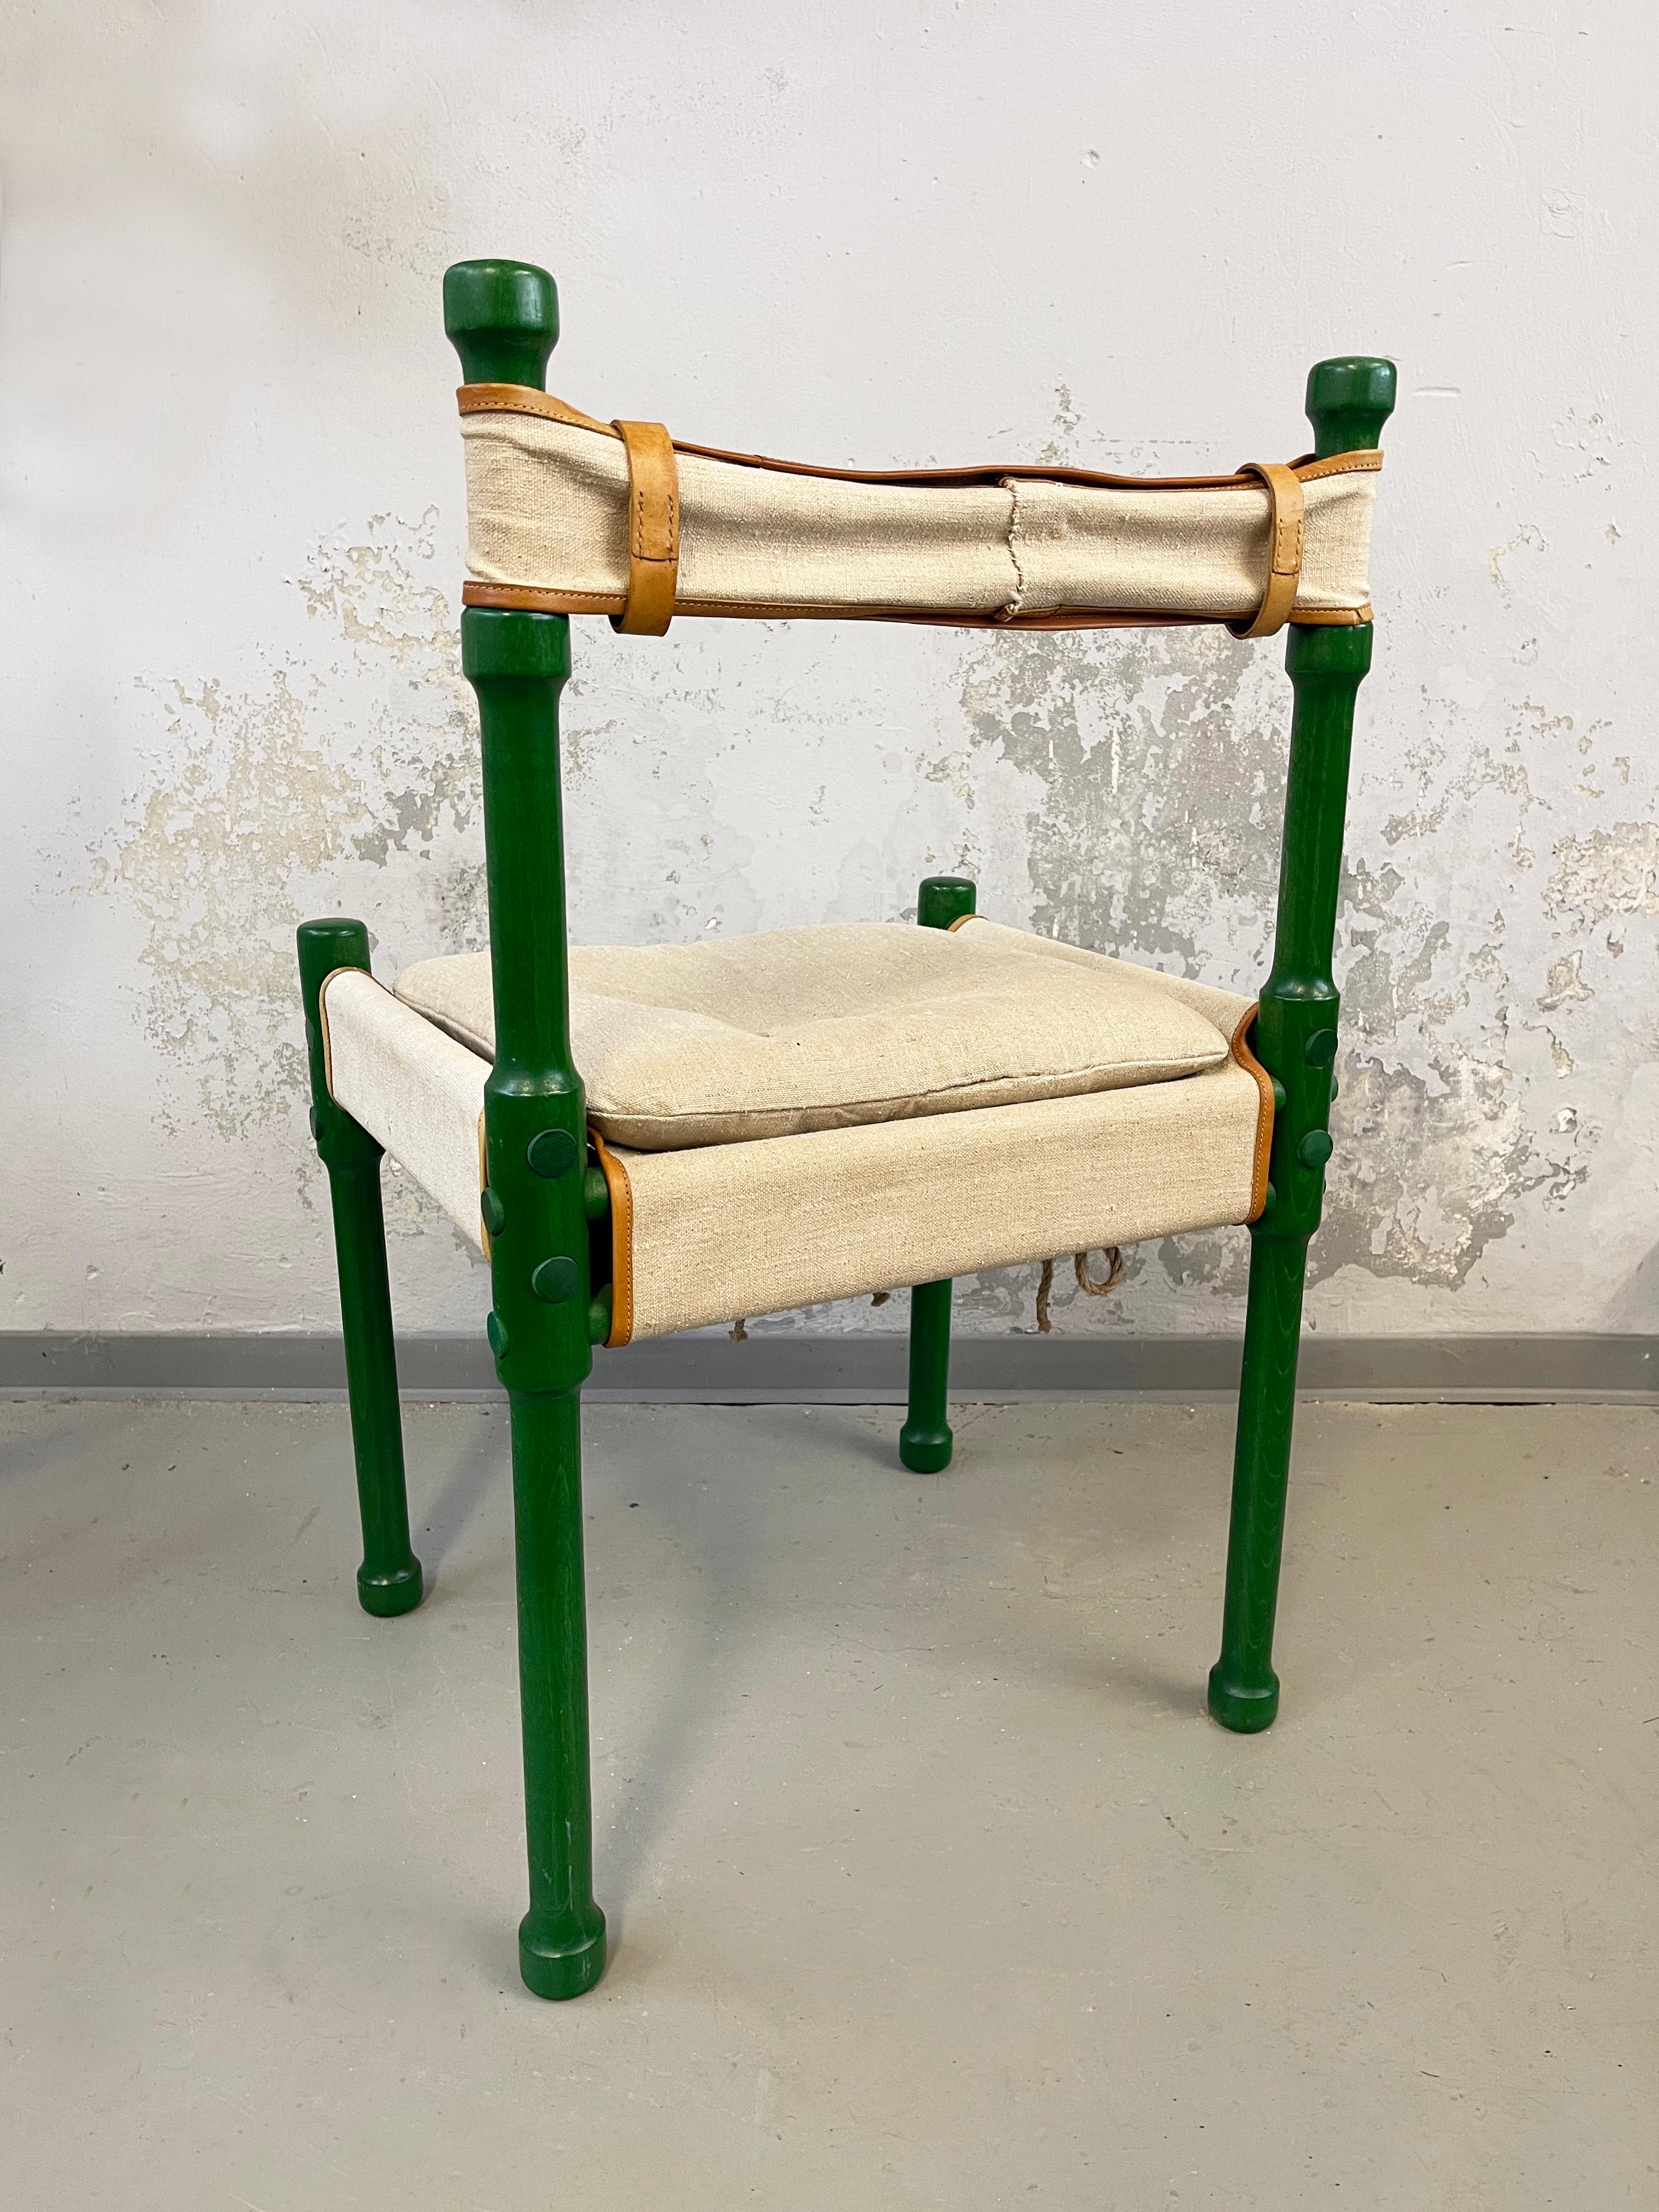 Hand-Crafted Mid-Century Dining Safari Chair Green, Wood, Leather & Linen, 1970s, Scandinavia